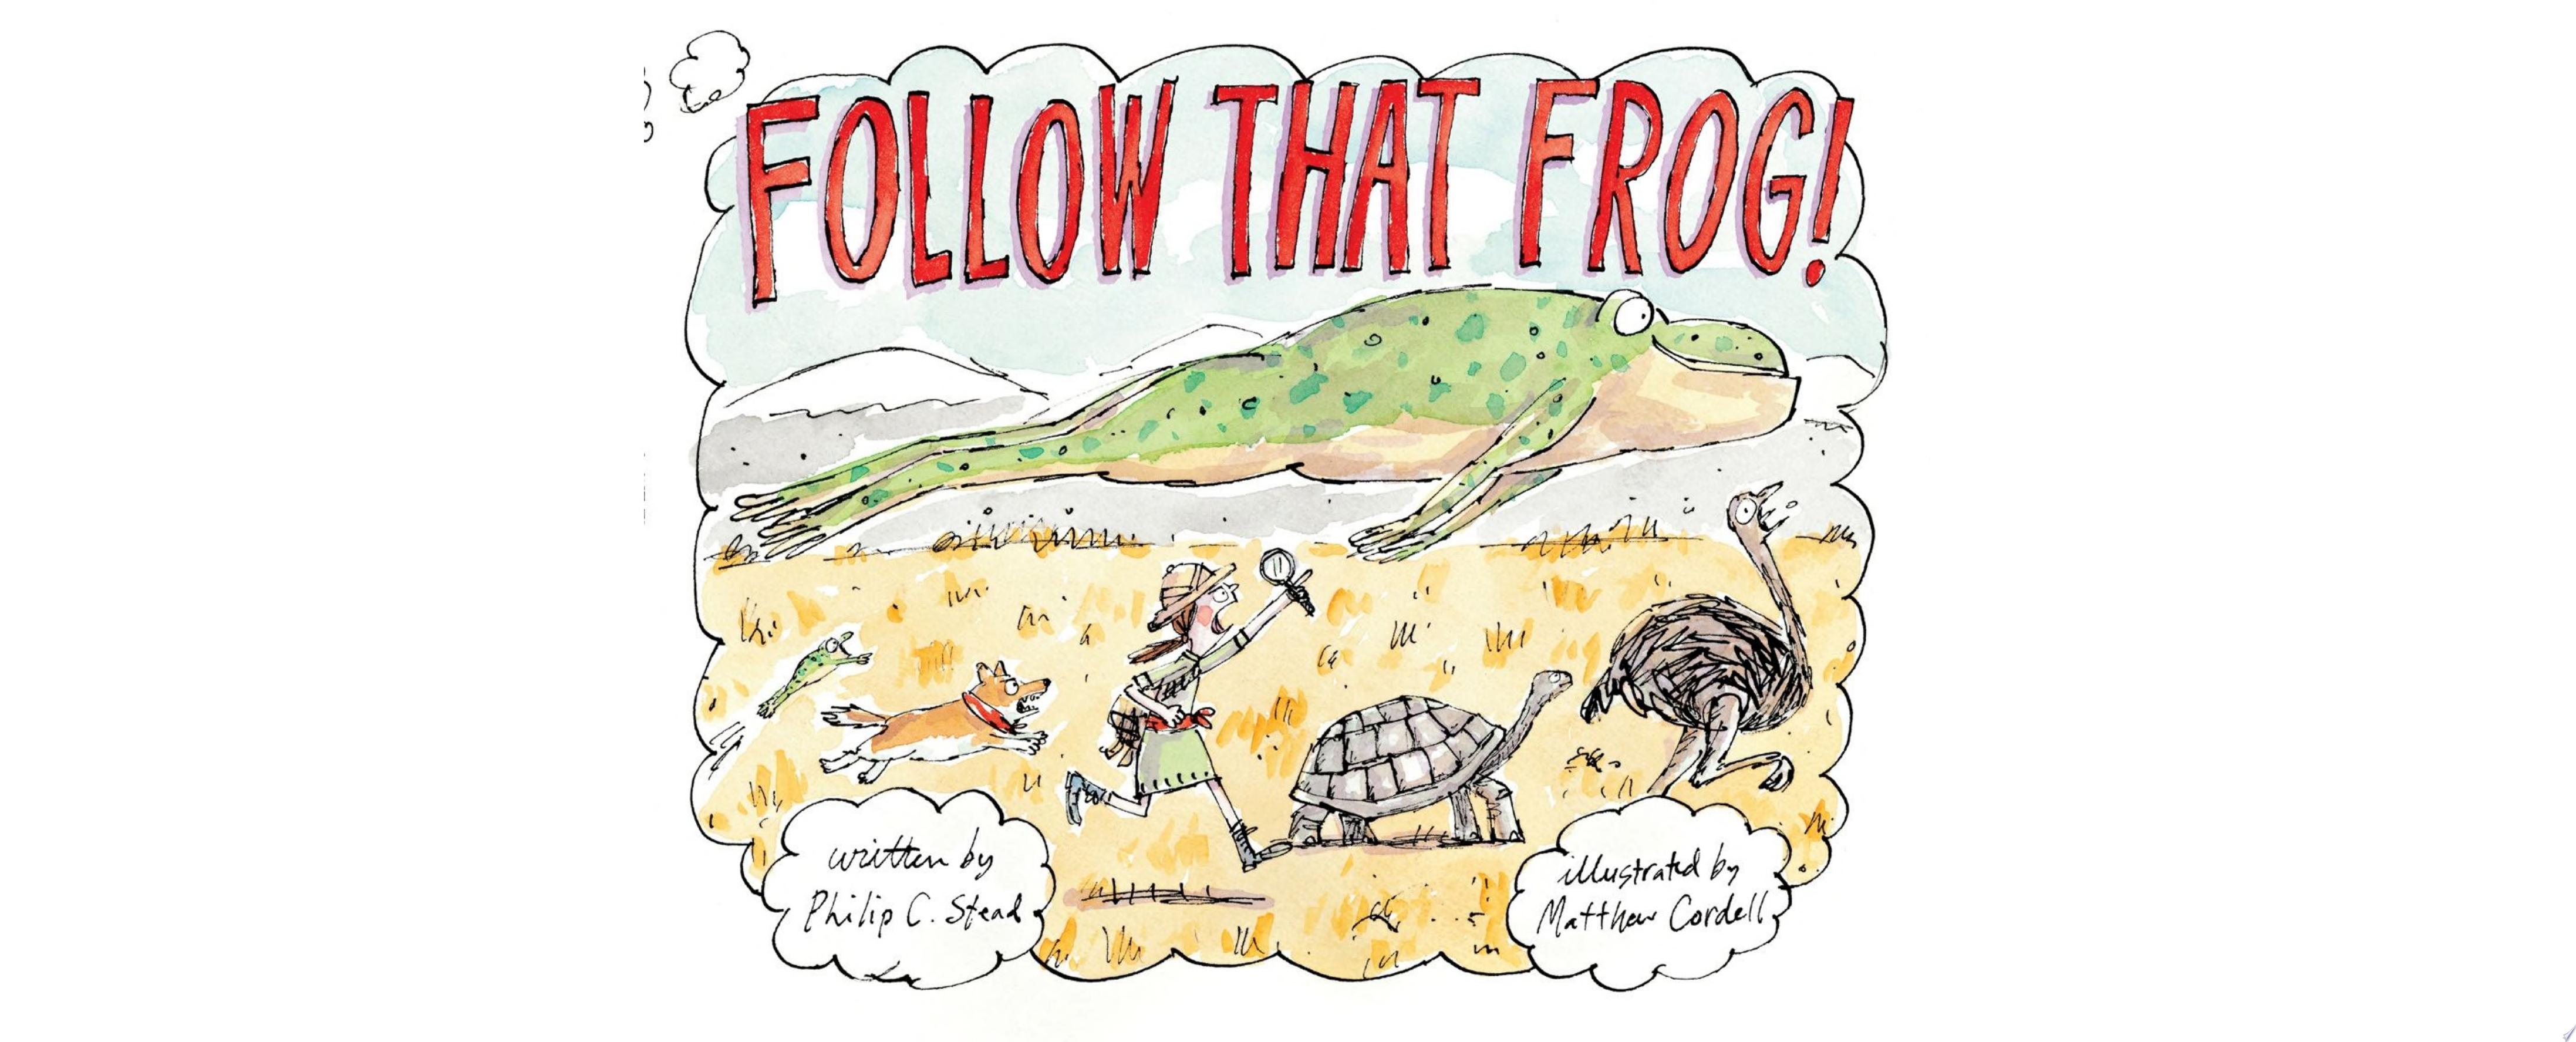 Image for "Follow That Frog!"